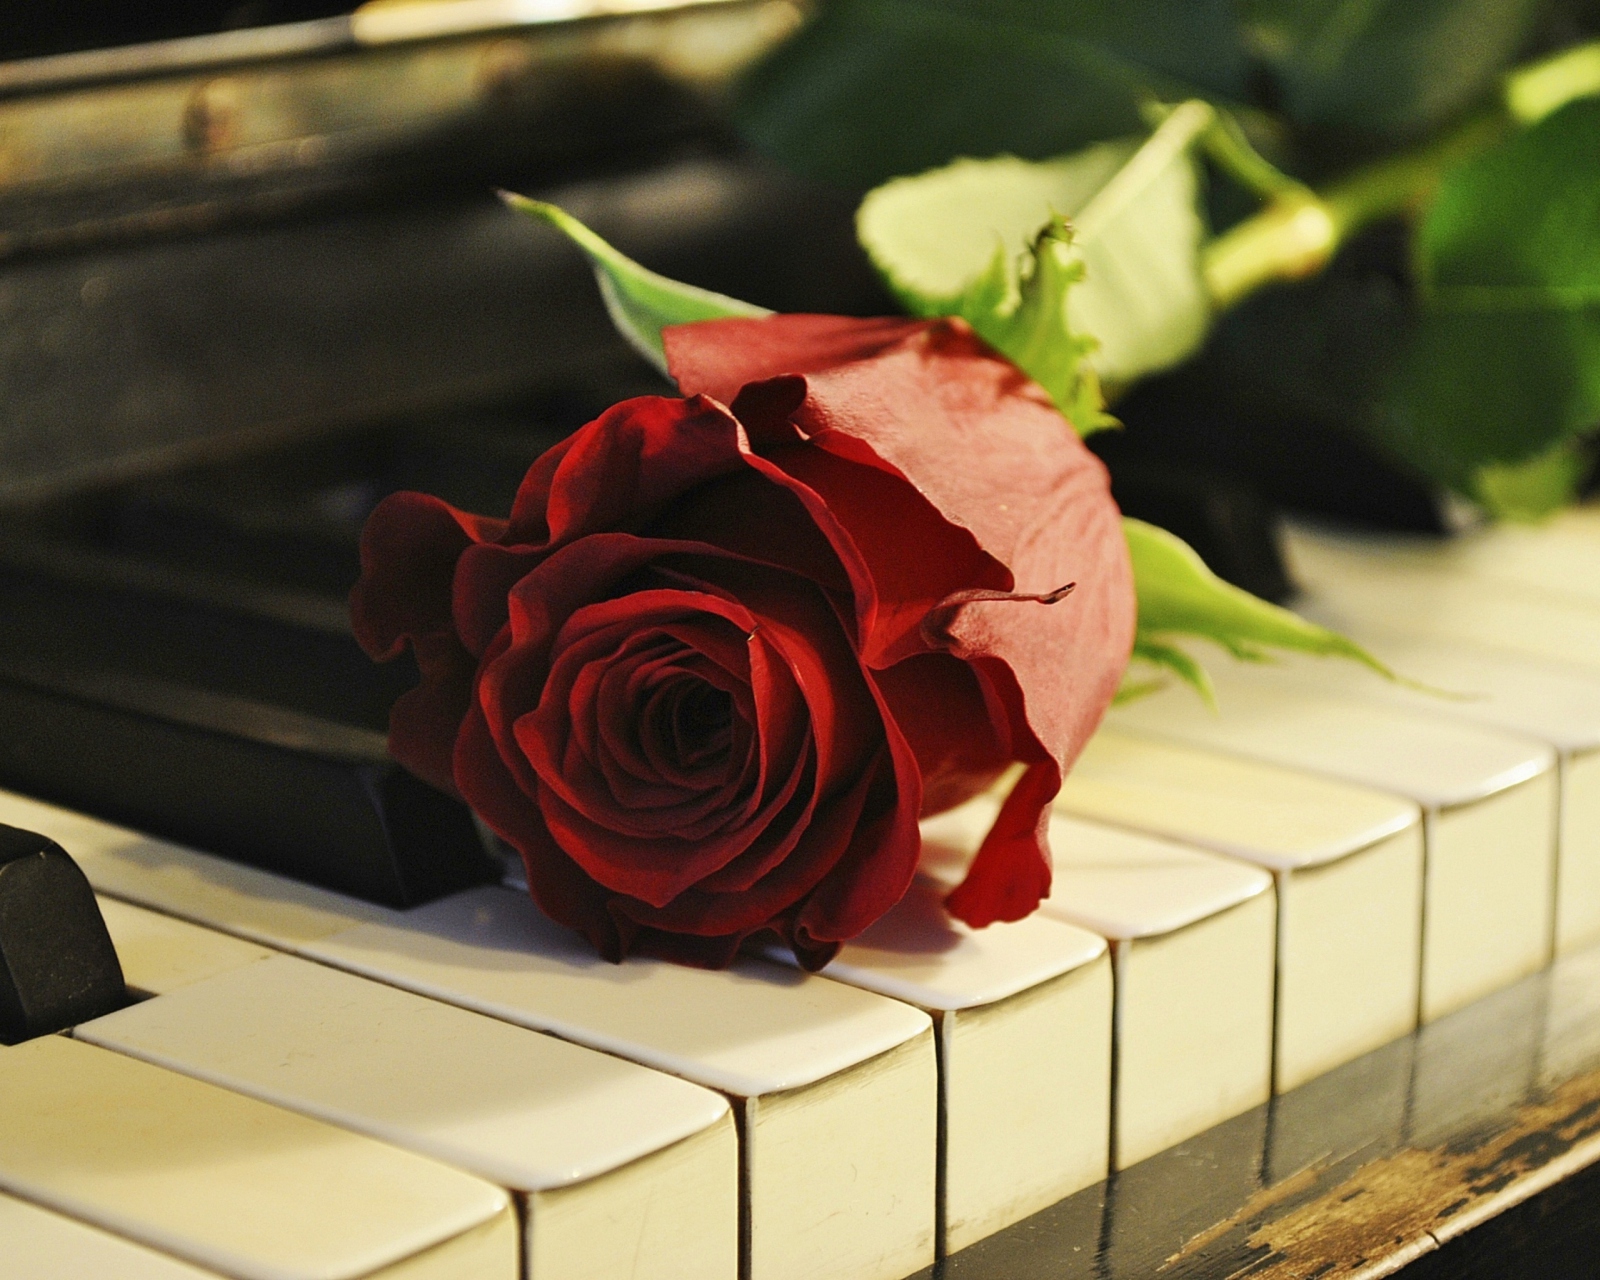 Rose On Piano wallpaper 1600x1280